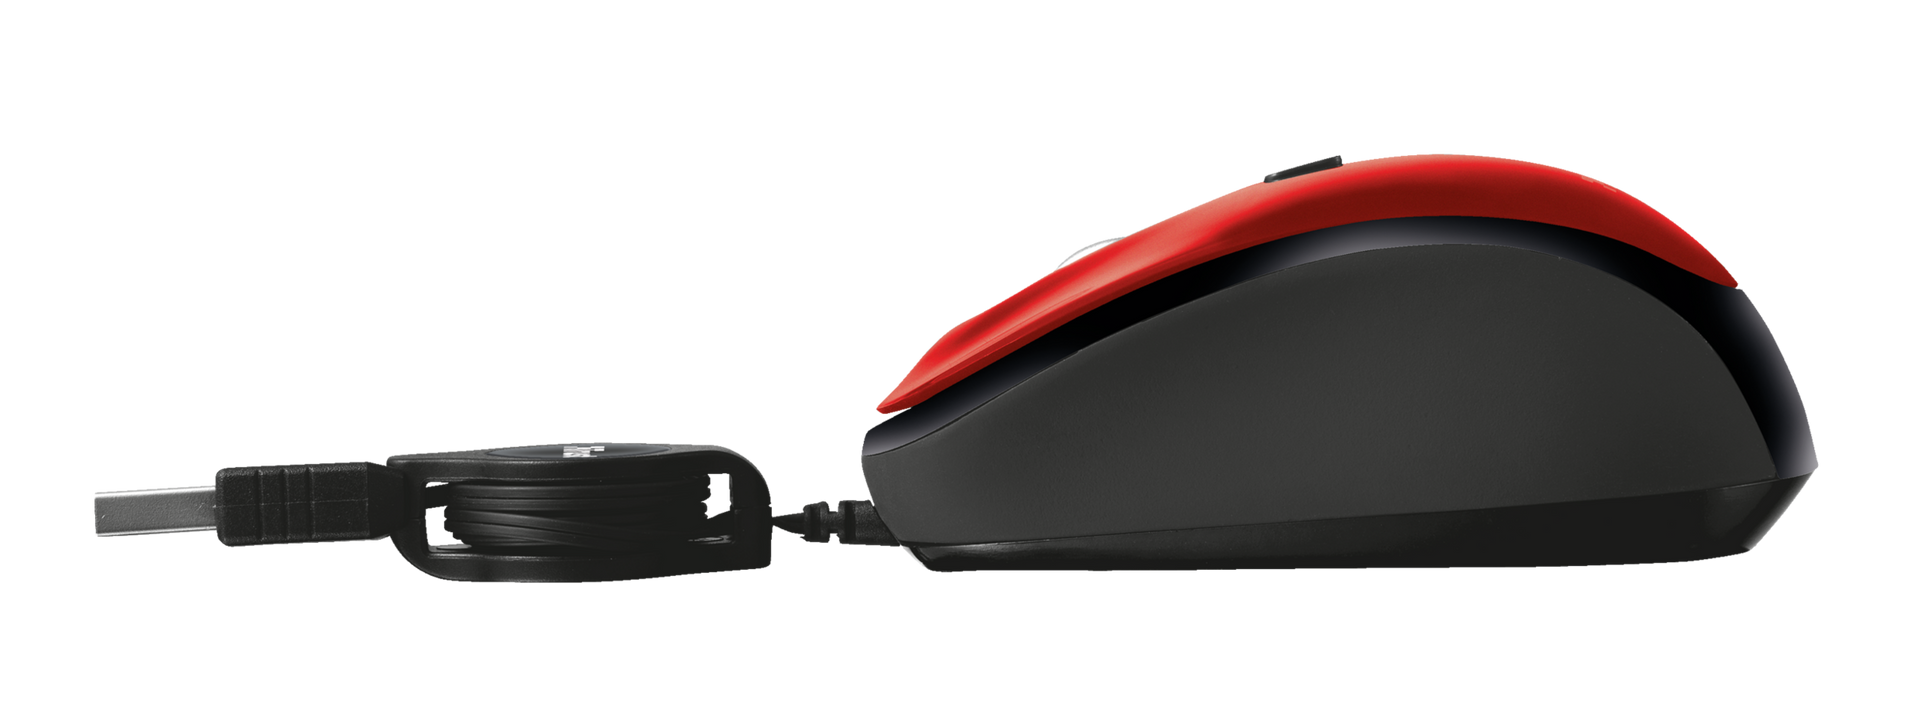 Yvi Retractable Mouse - red-Side